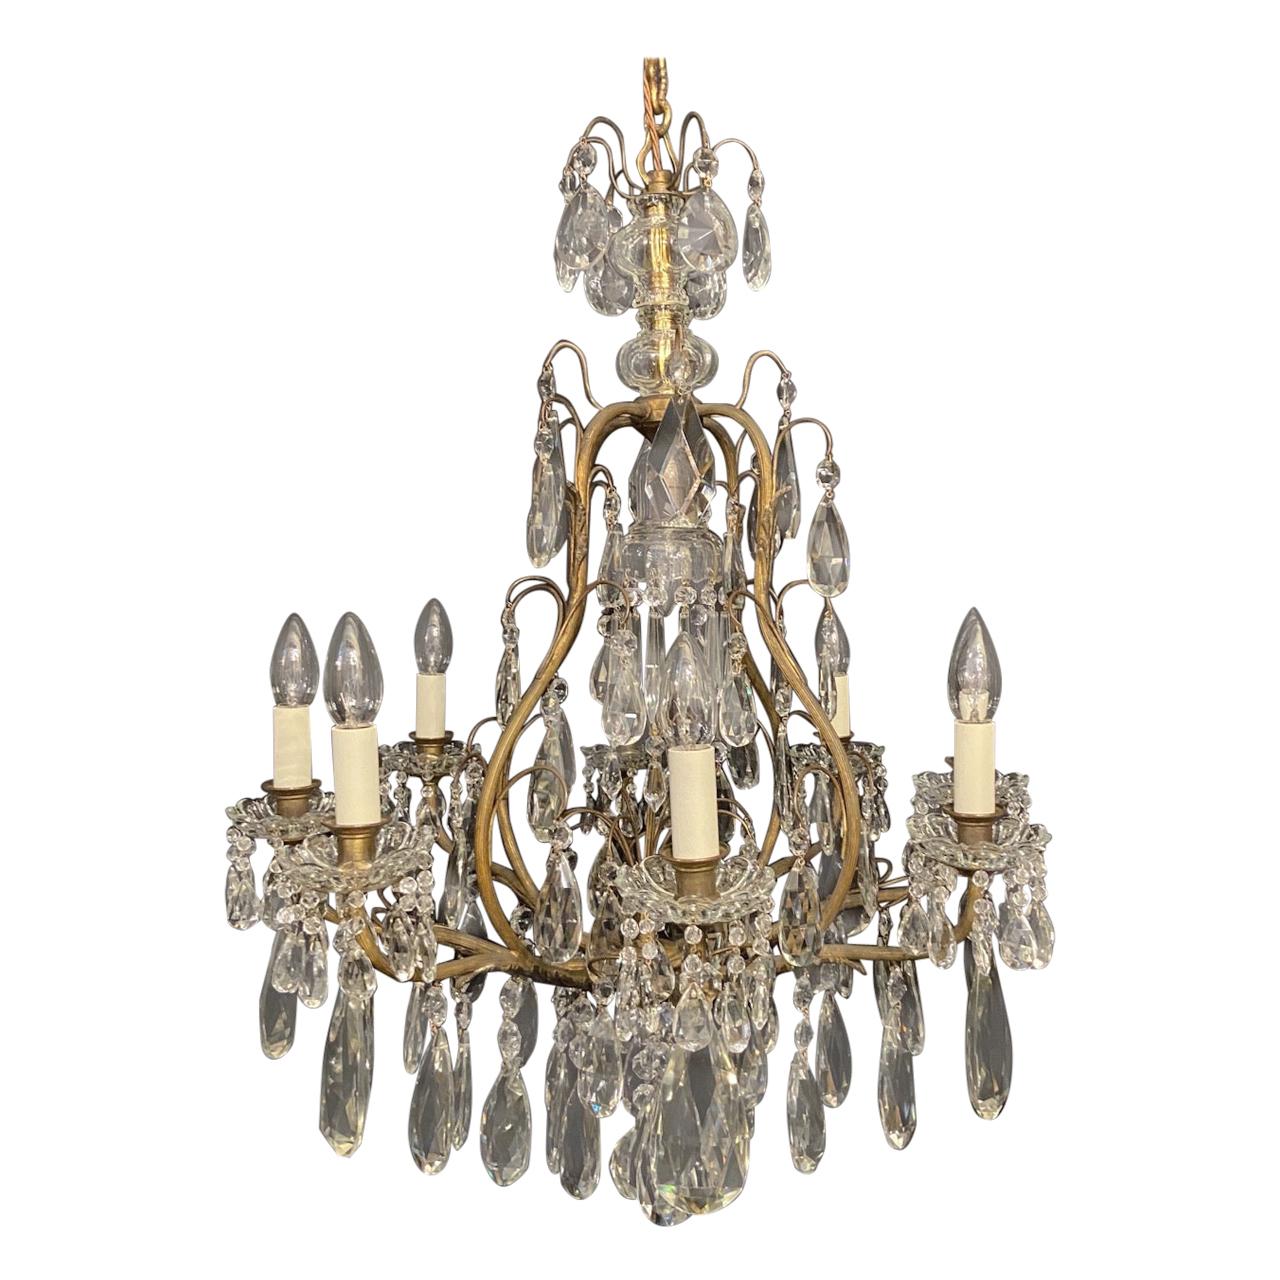 French Gilded Brass and Crystal 9-Light Antique Chandelier For Sale